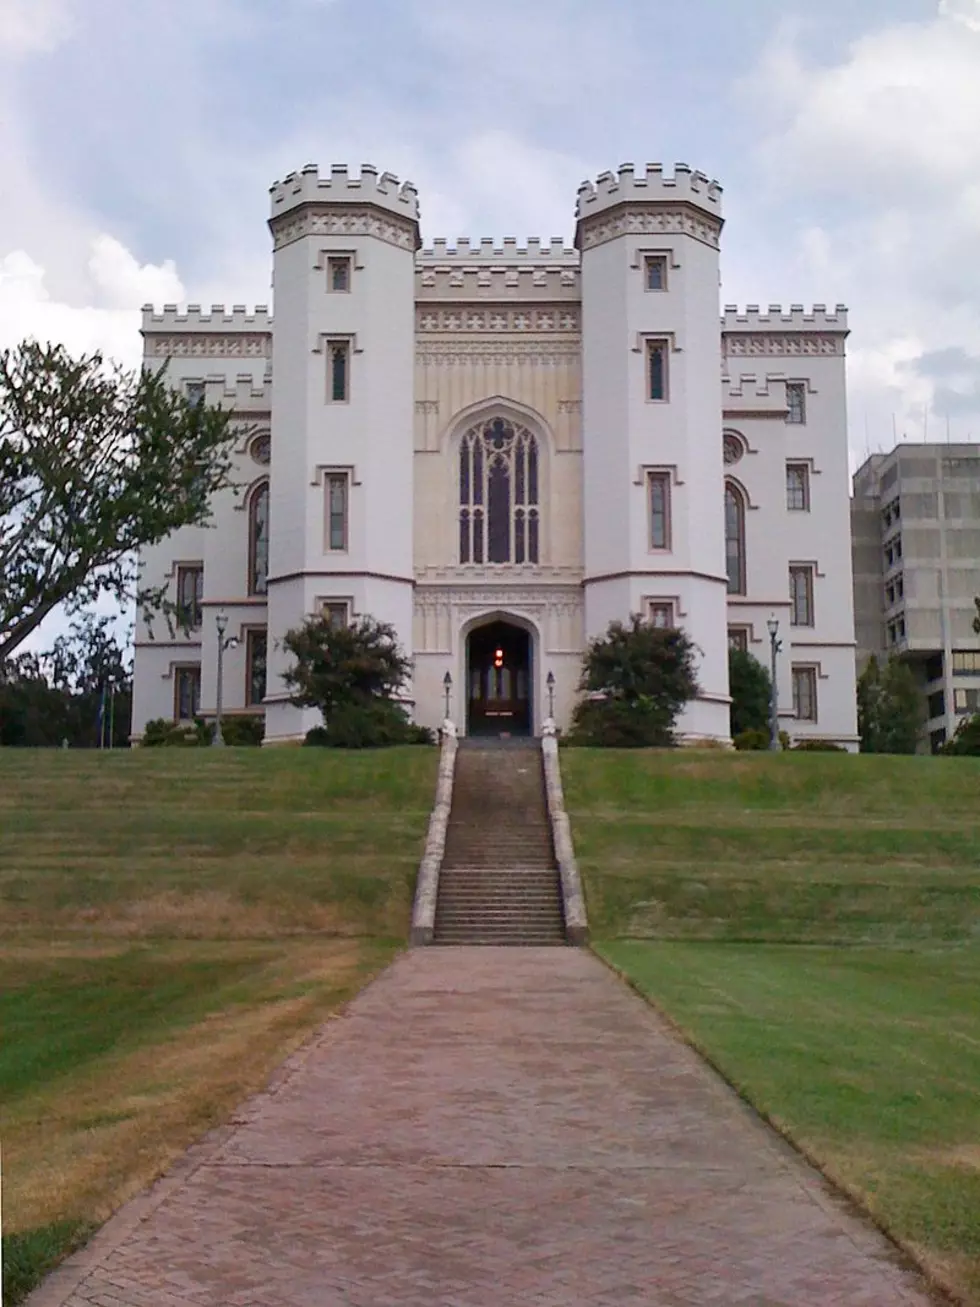 Louisiana&#8217;s Old State Capitol Featured On Travel Channel&#8217;s &#8216;Mysteries At The Castle&#8217;